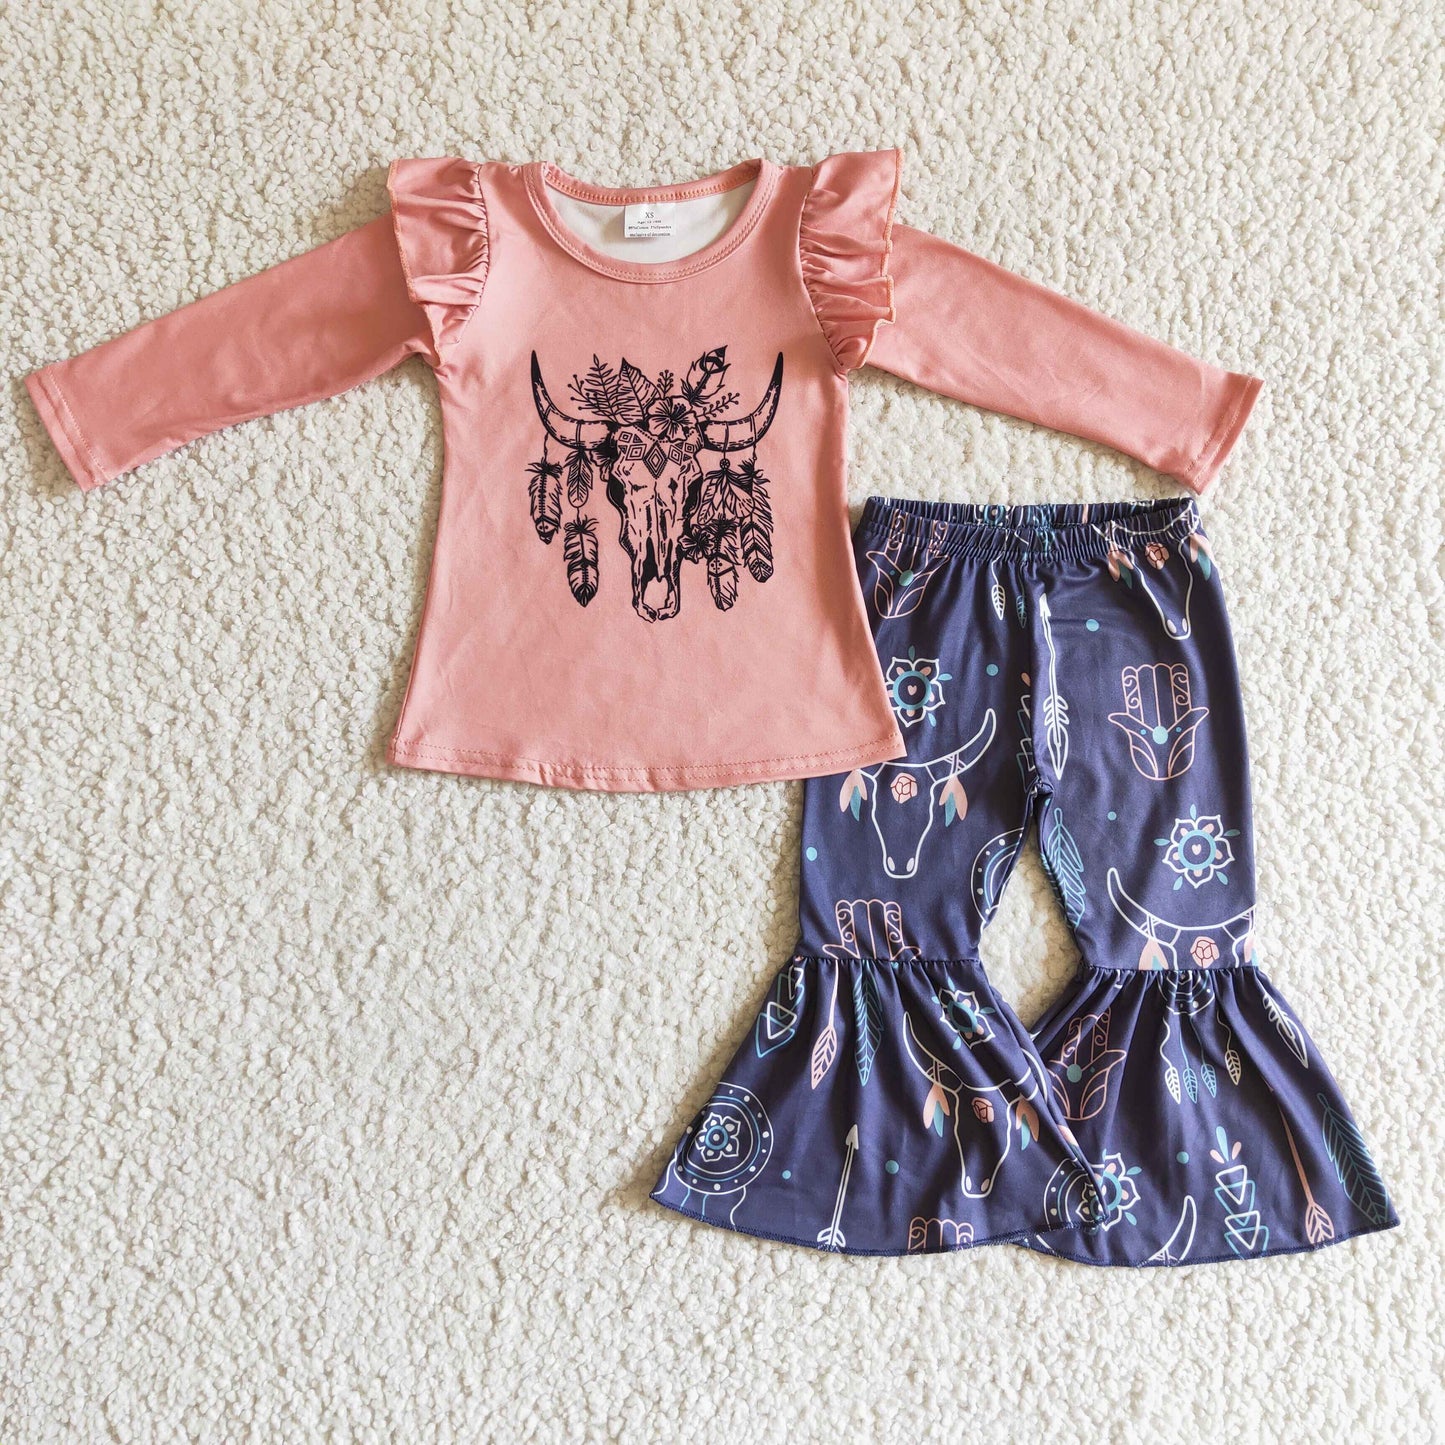 cattle outfit pink clothing set